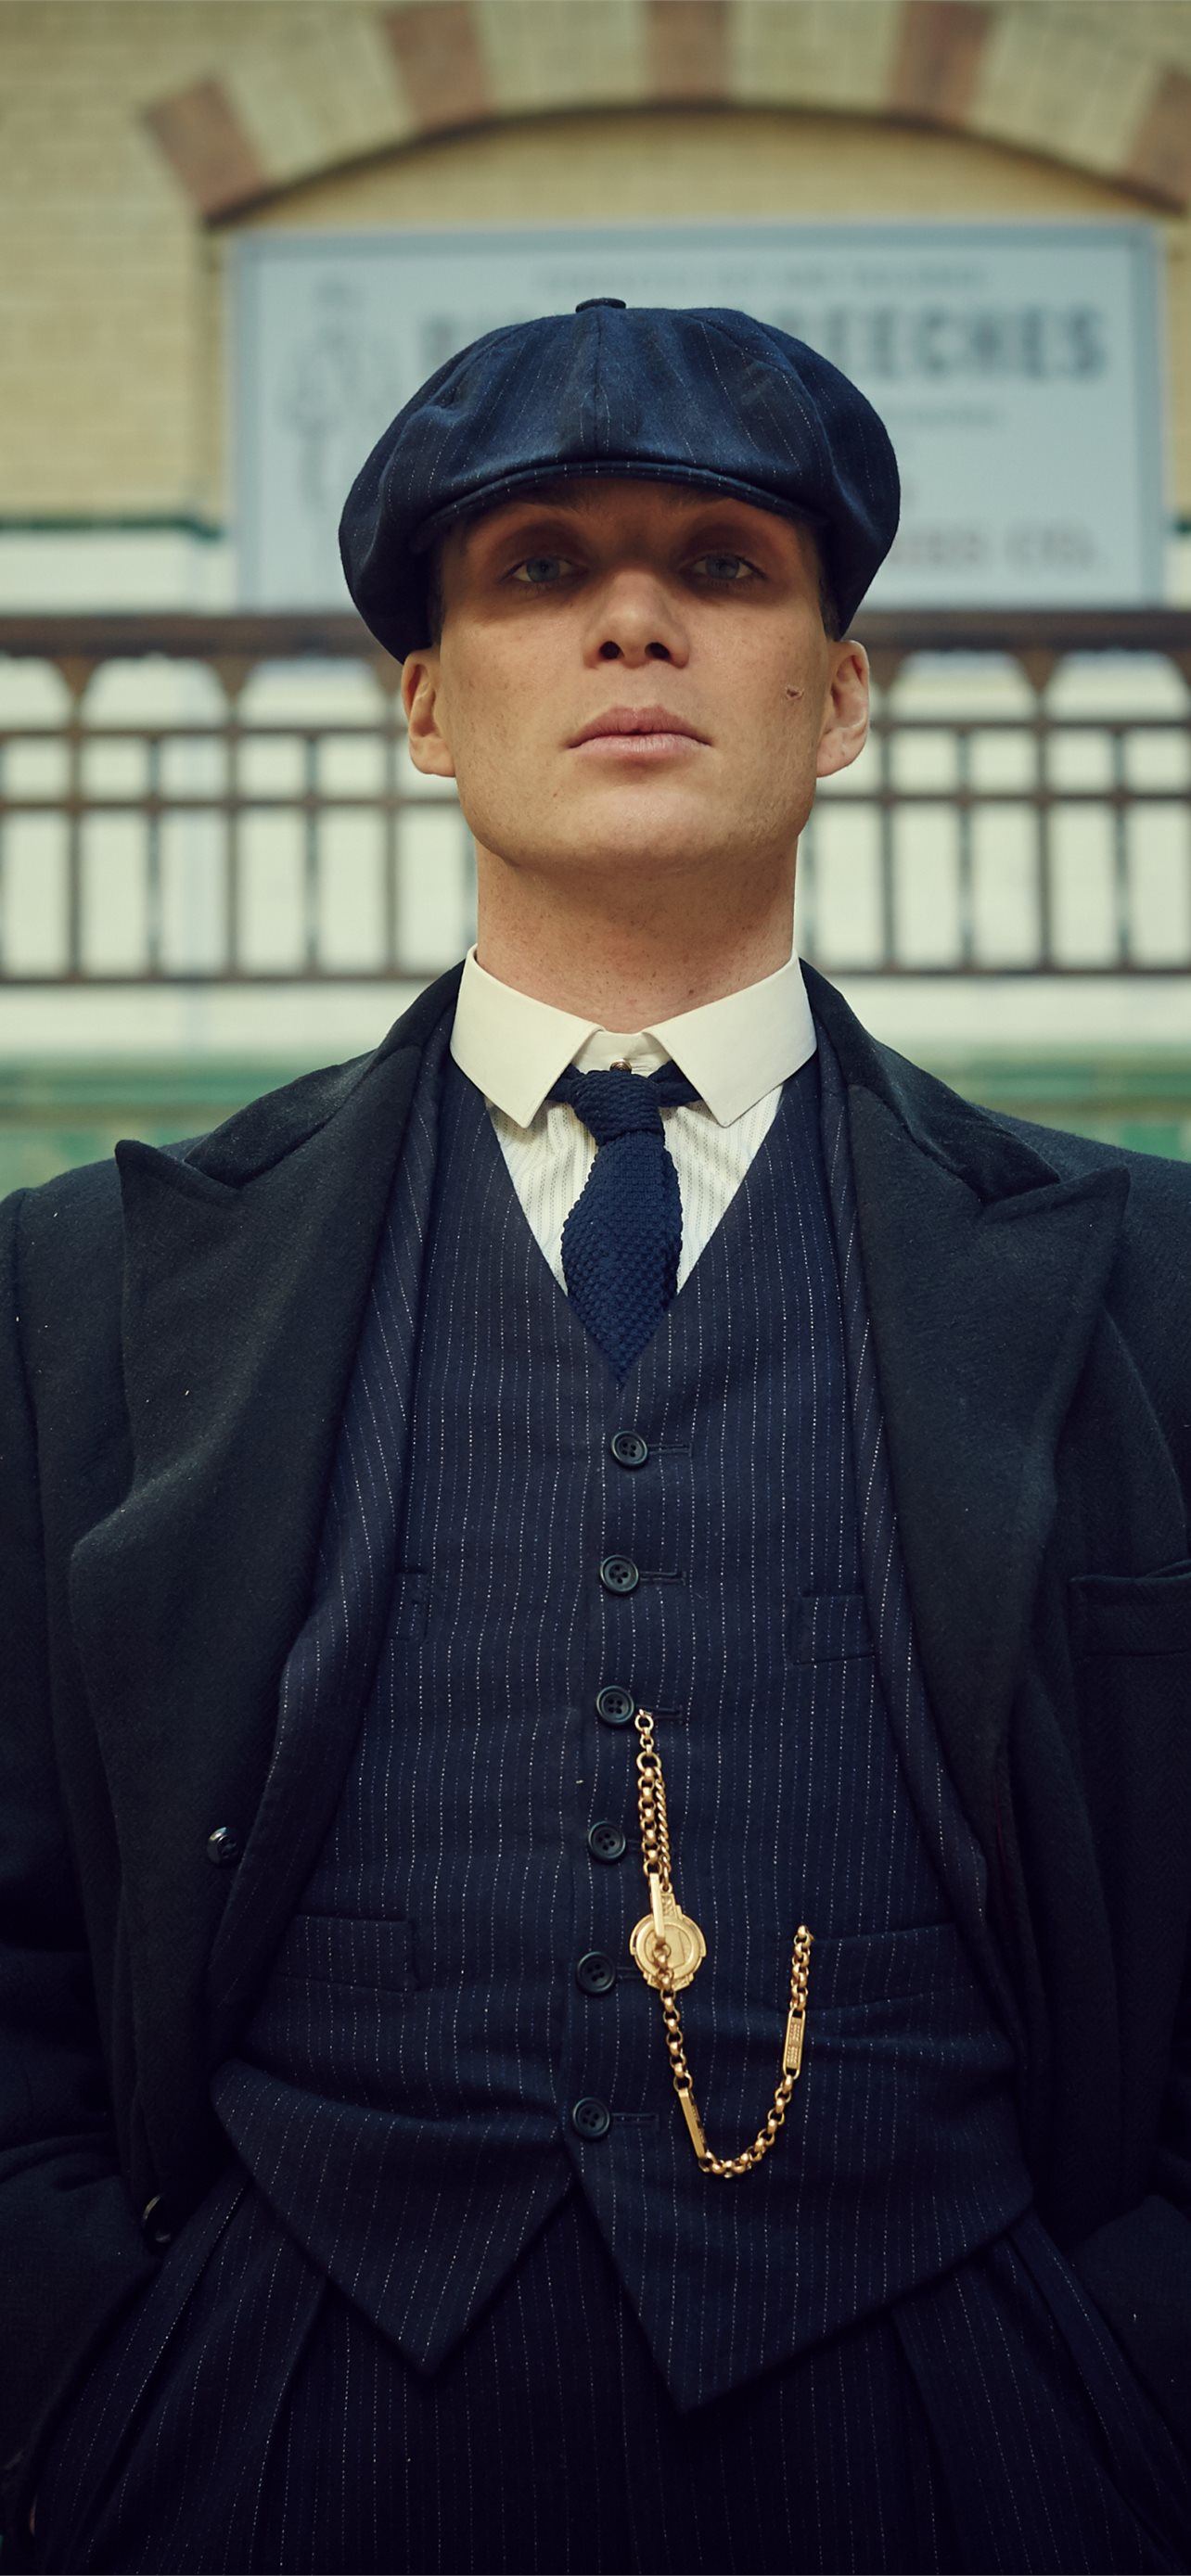 I made this wallpaper for you guys if anyone wants it ahead of season 6  Sized for iPhone 13  rPeakyBlinders